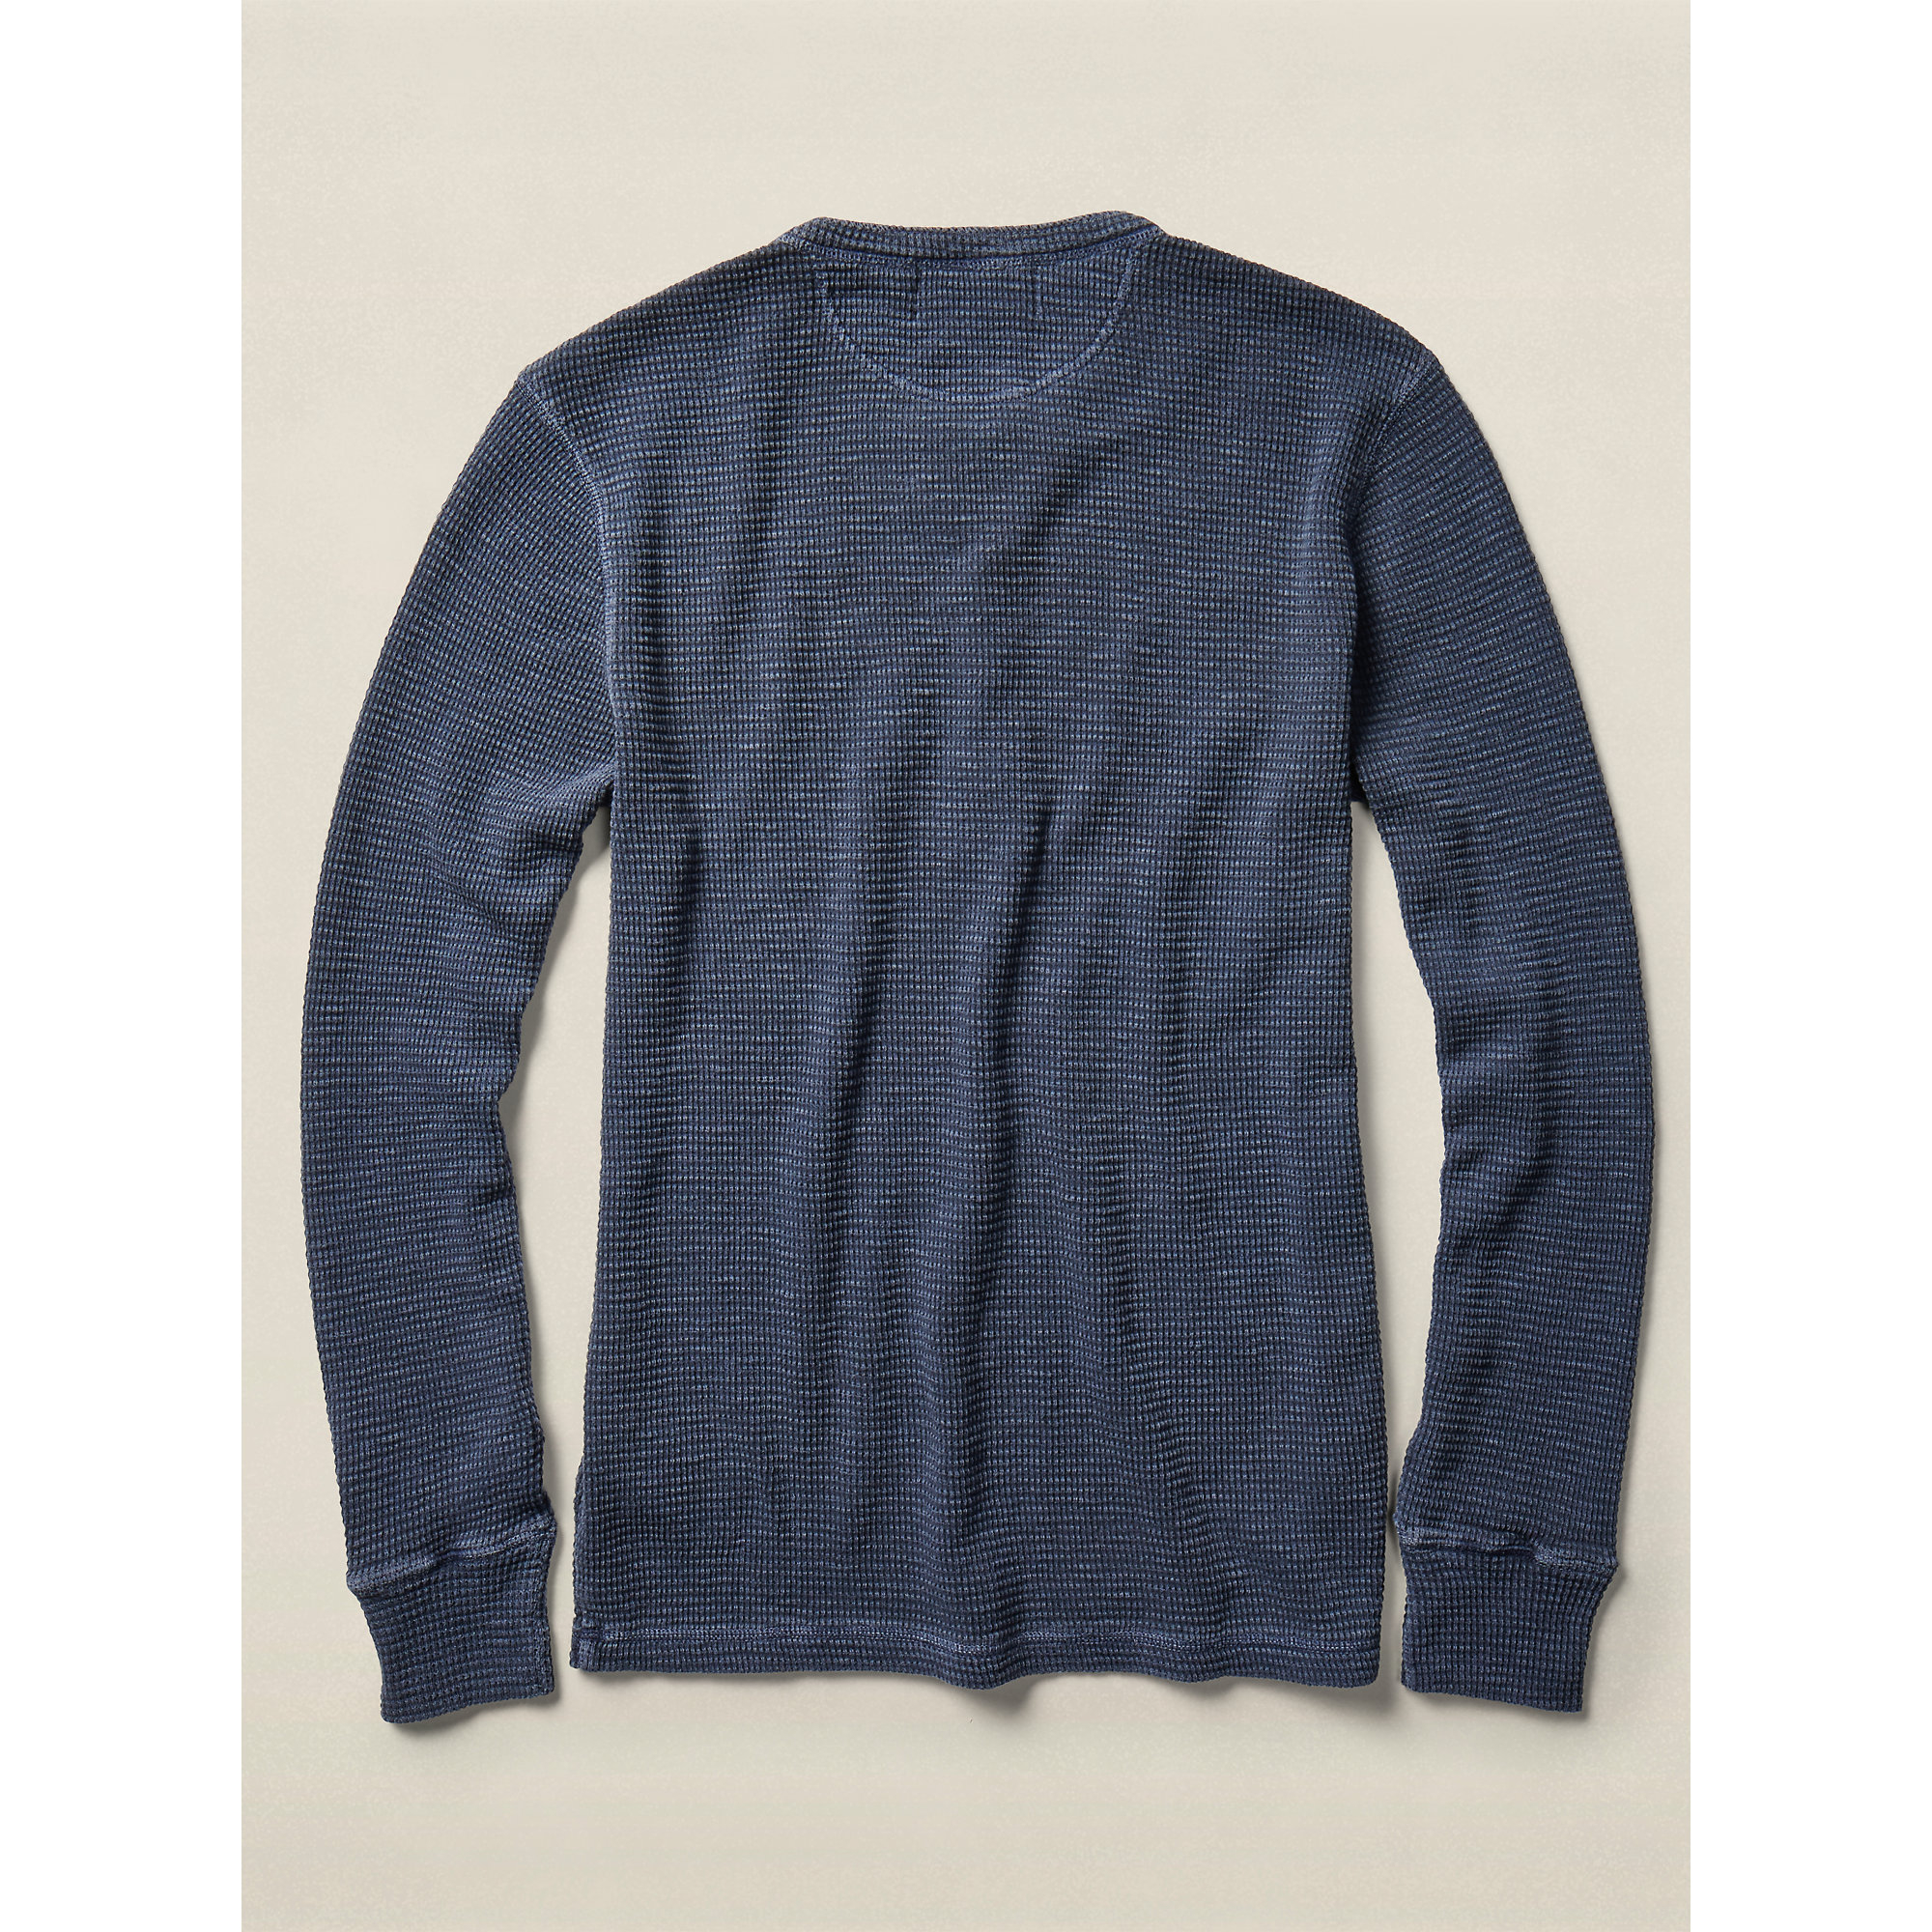 Lyst - Rrl Waffle-knit Cotton Henley in Blue for Men